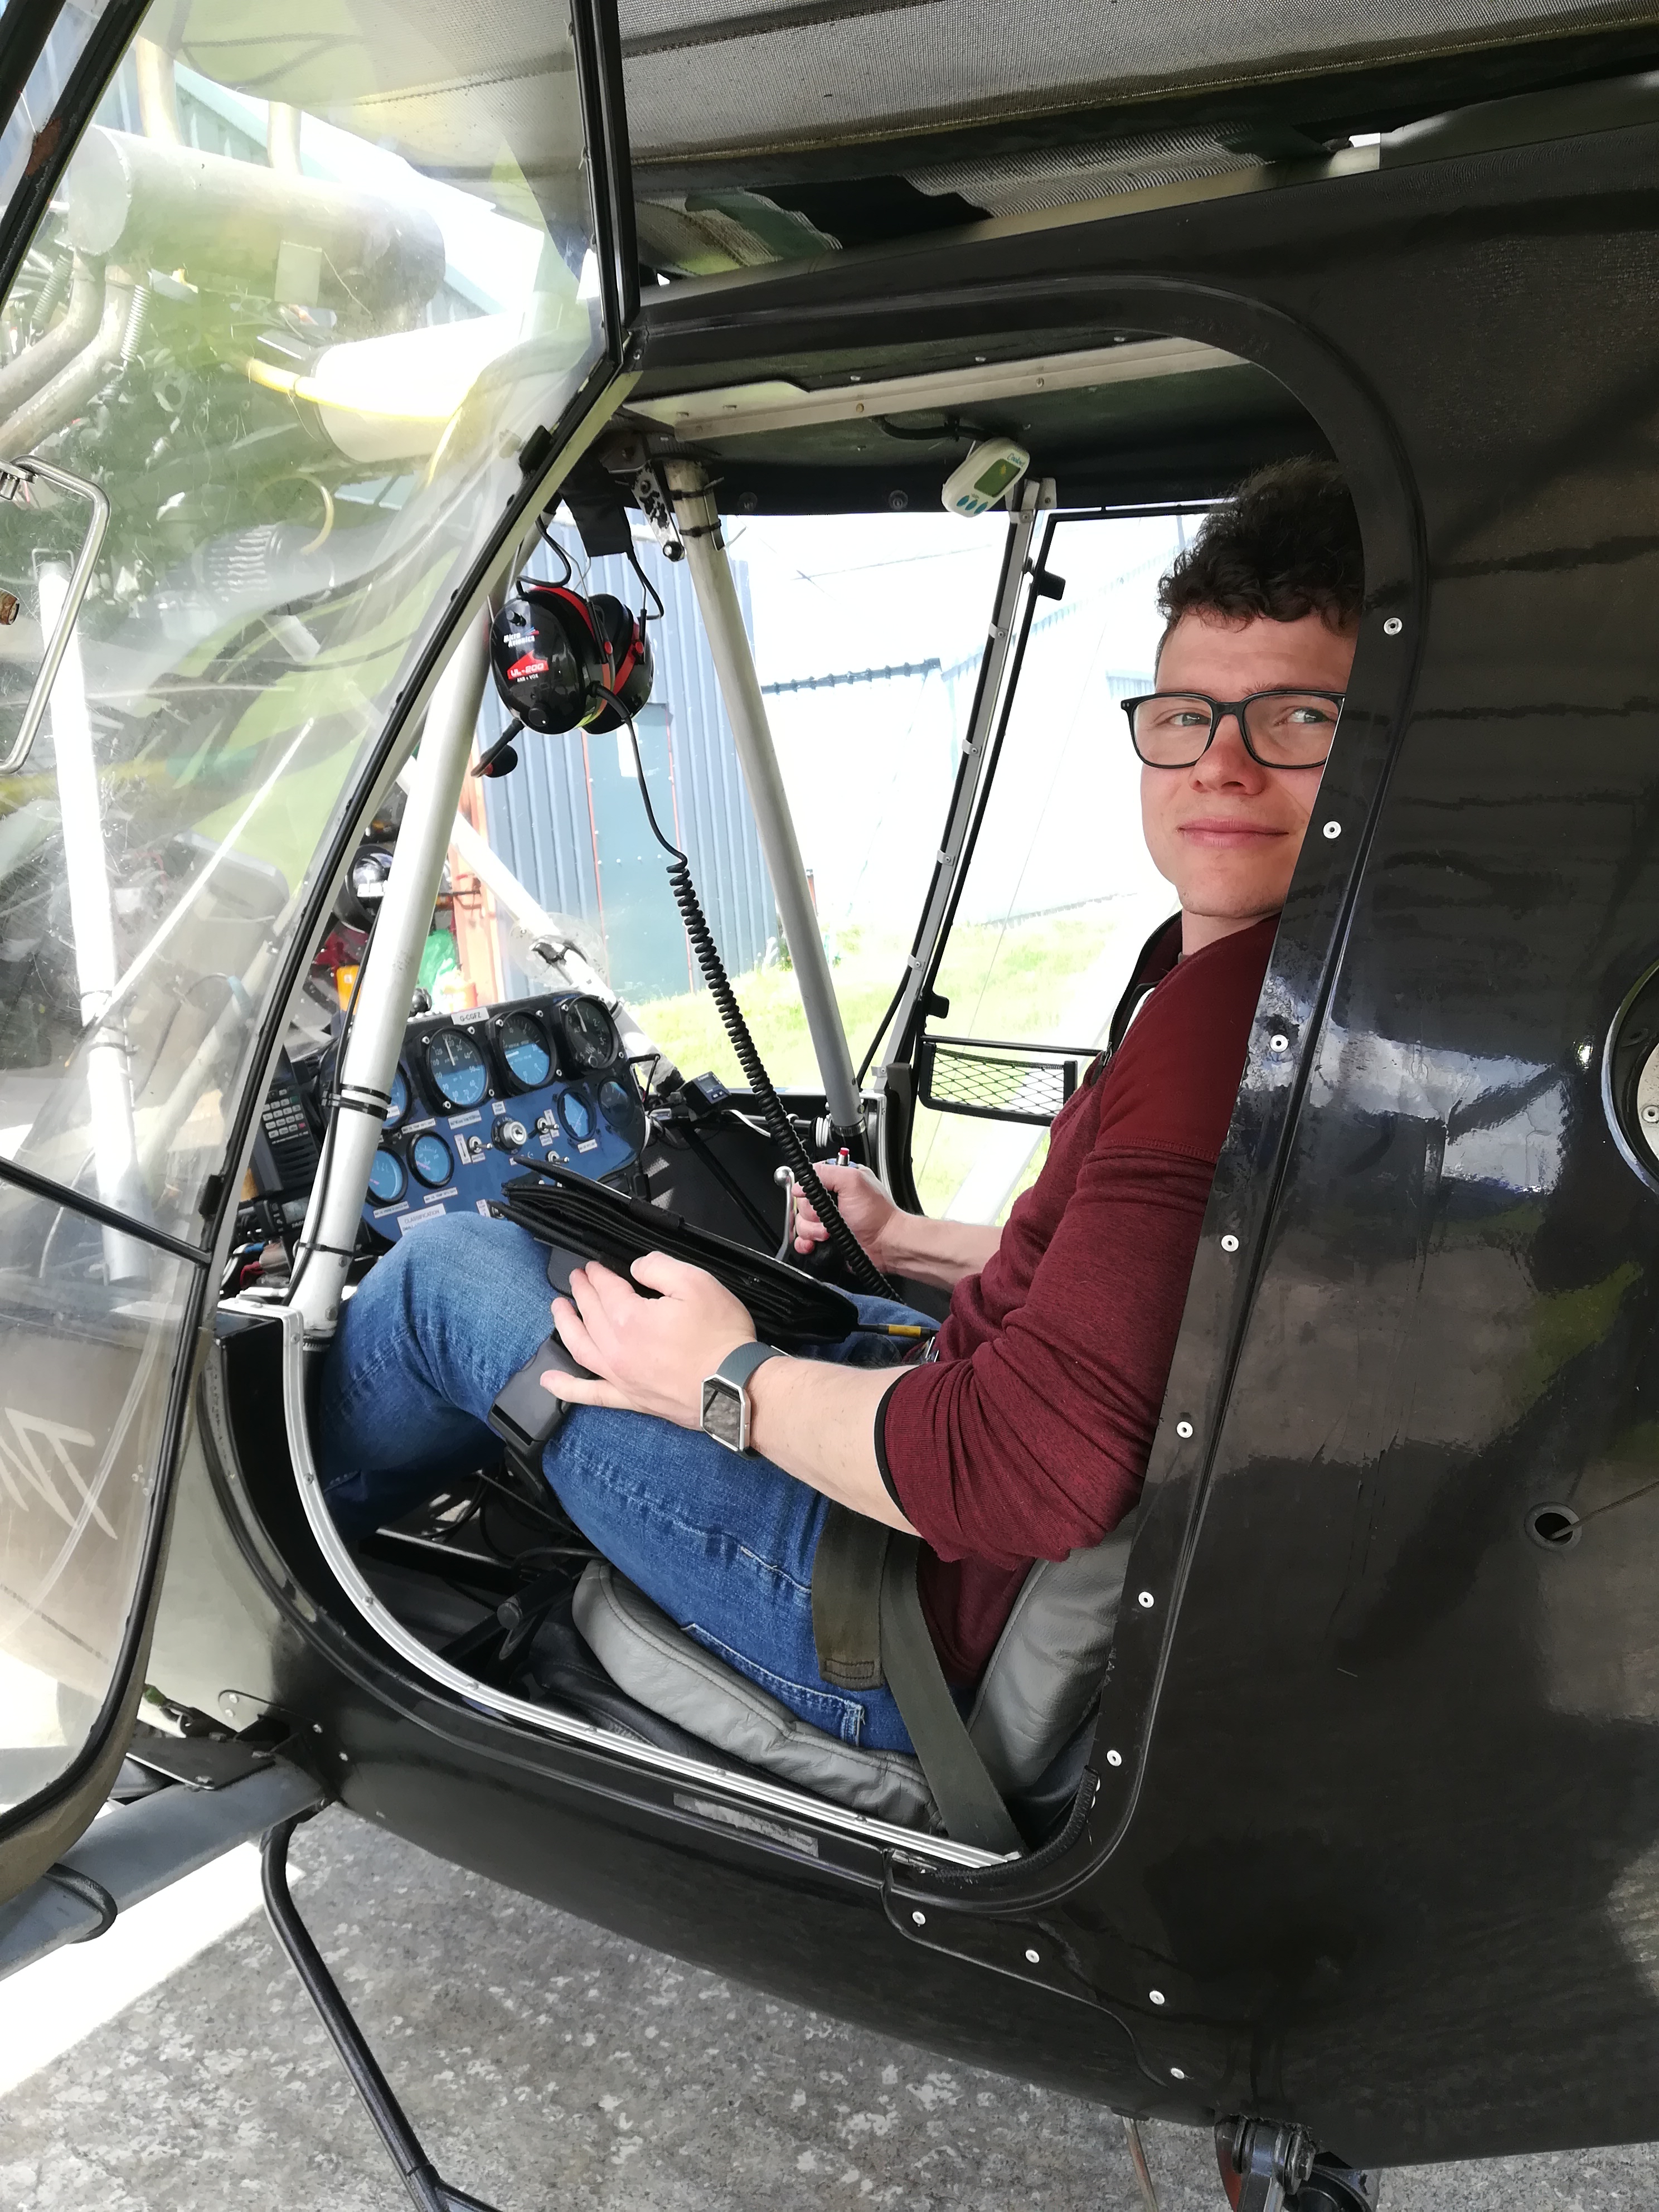 The Weather Gods relented to allow Sean Devlin to go First Solo